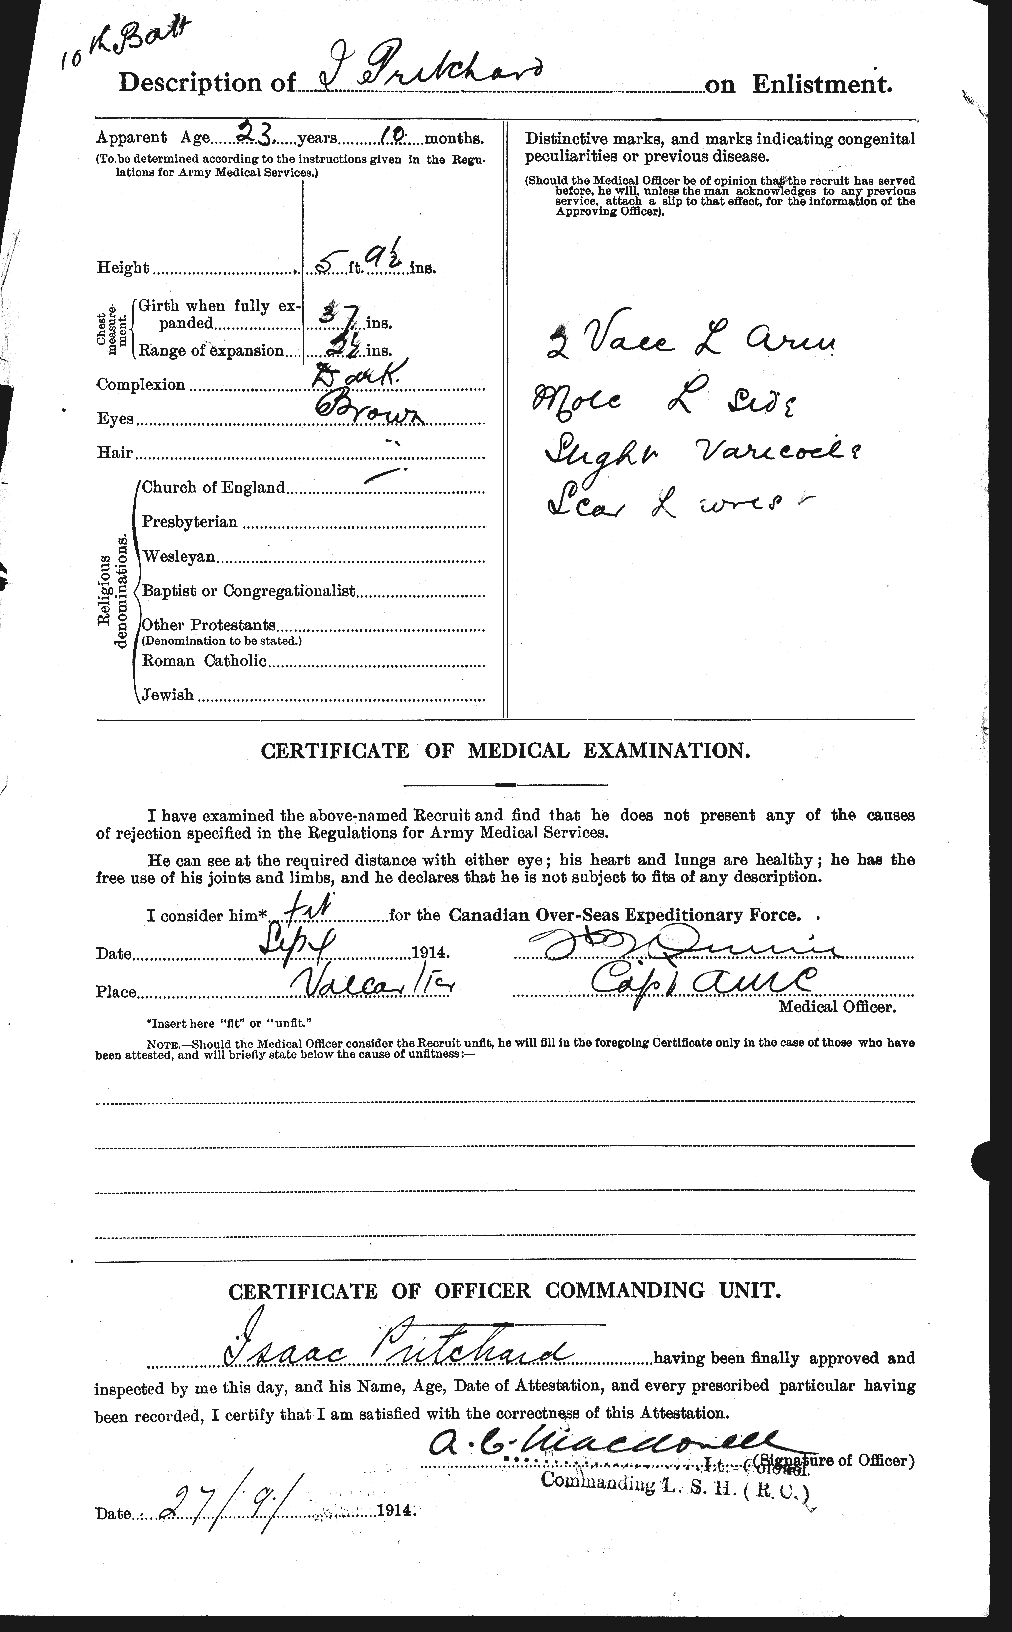 Personnel Records of the First World War - CEF 588556b